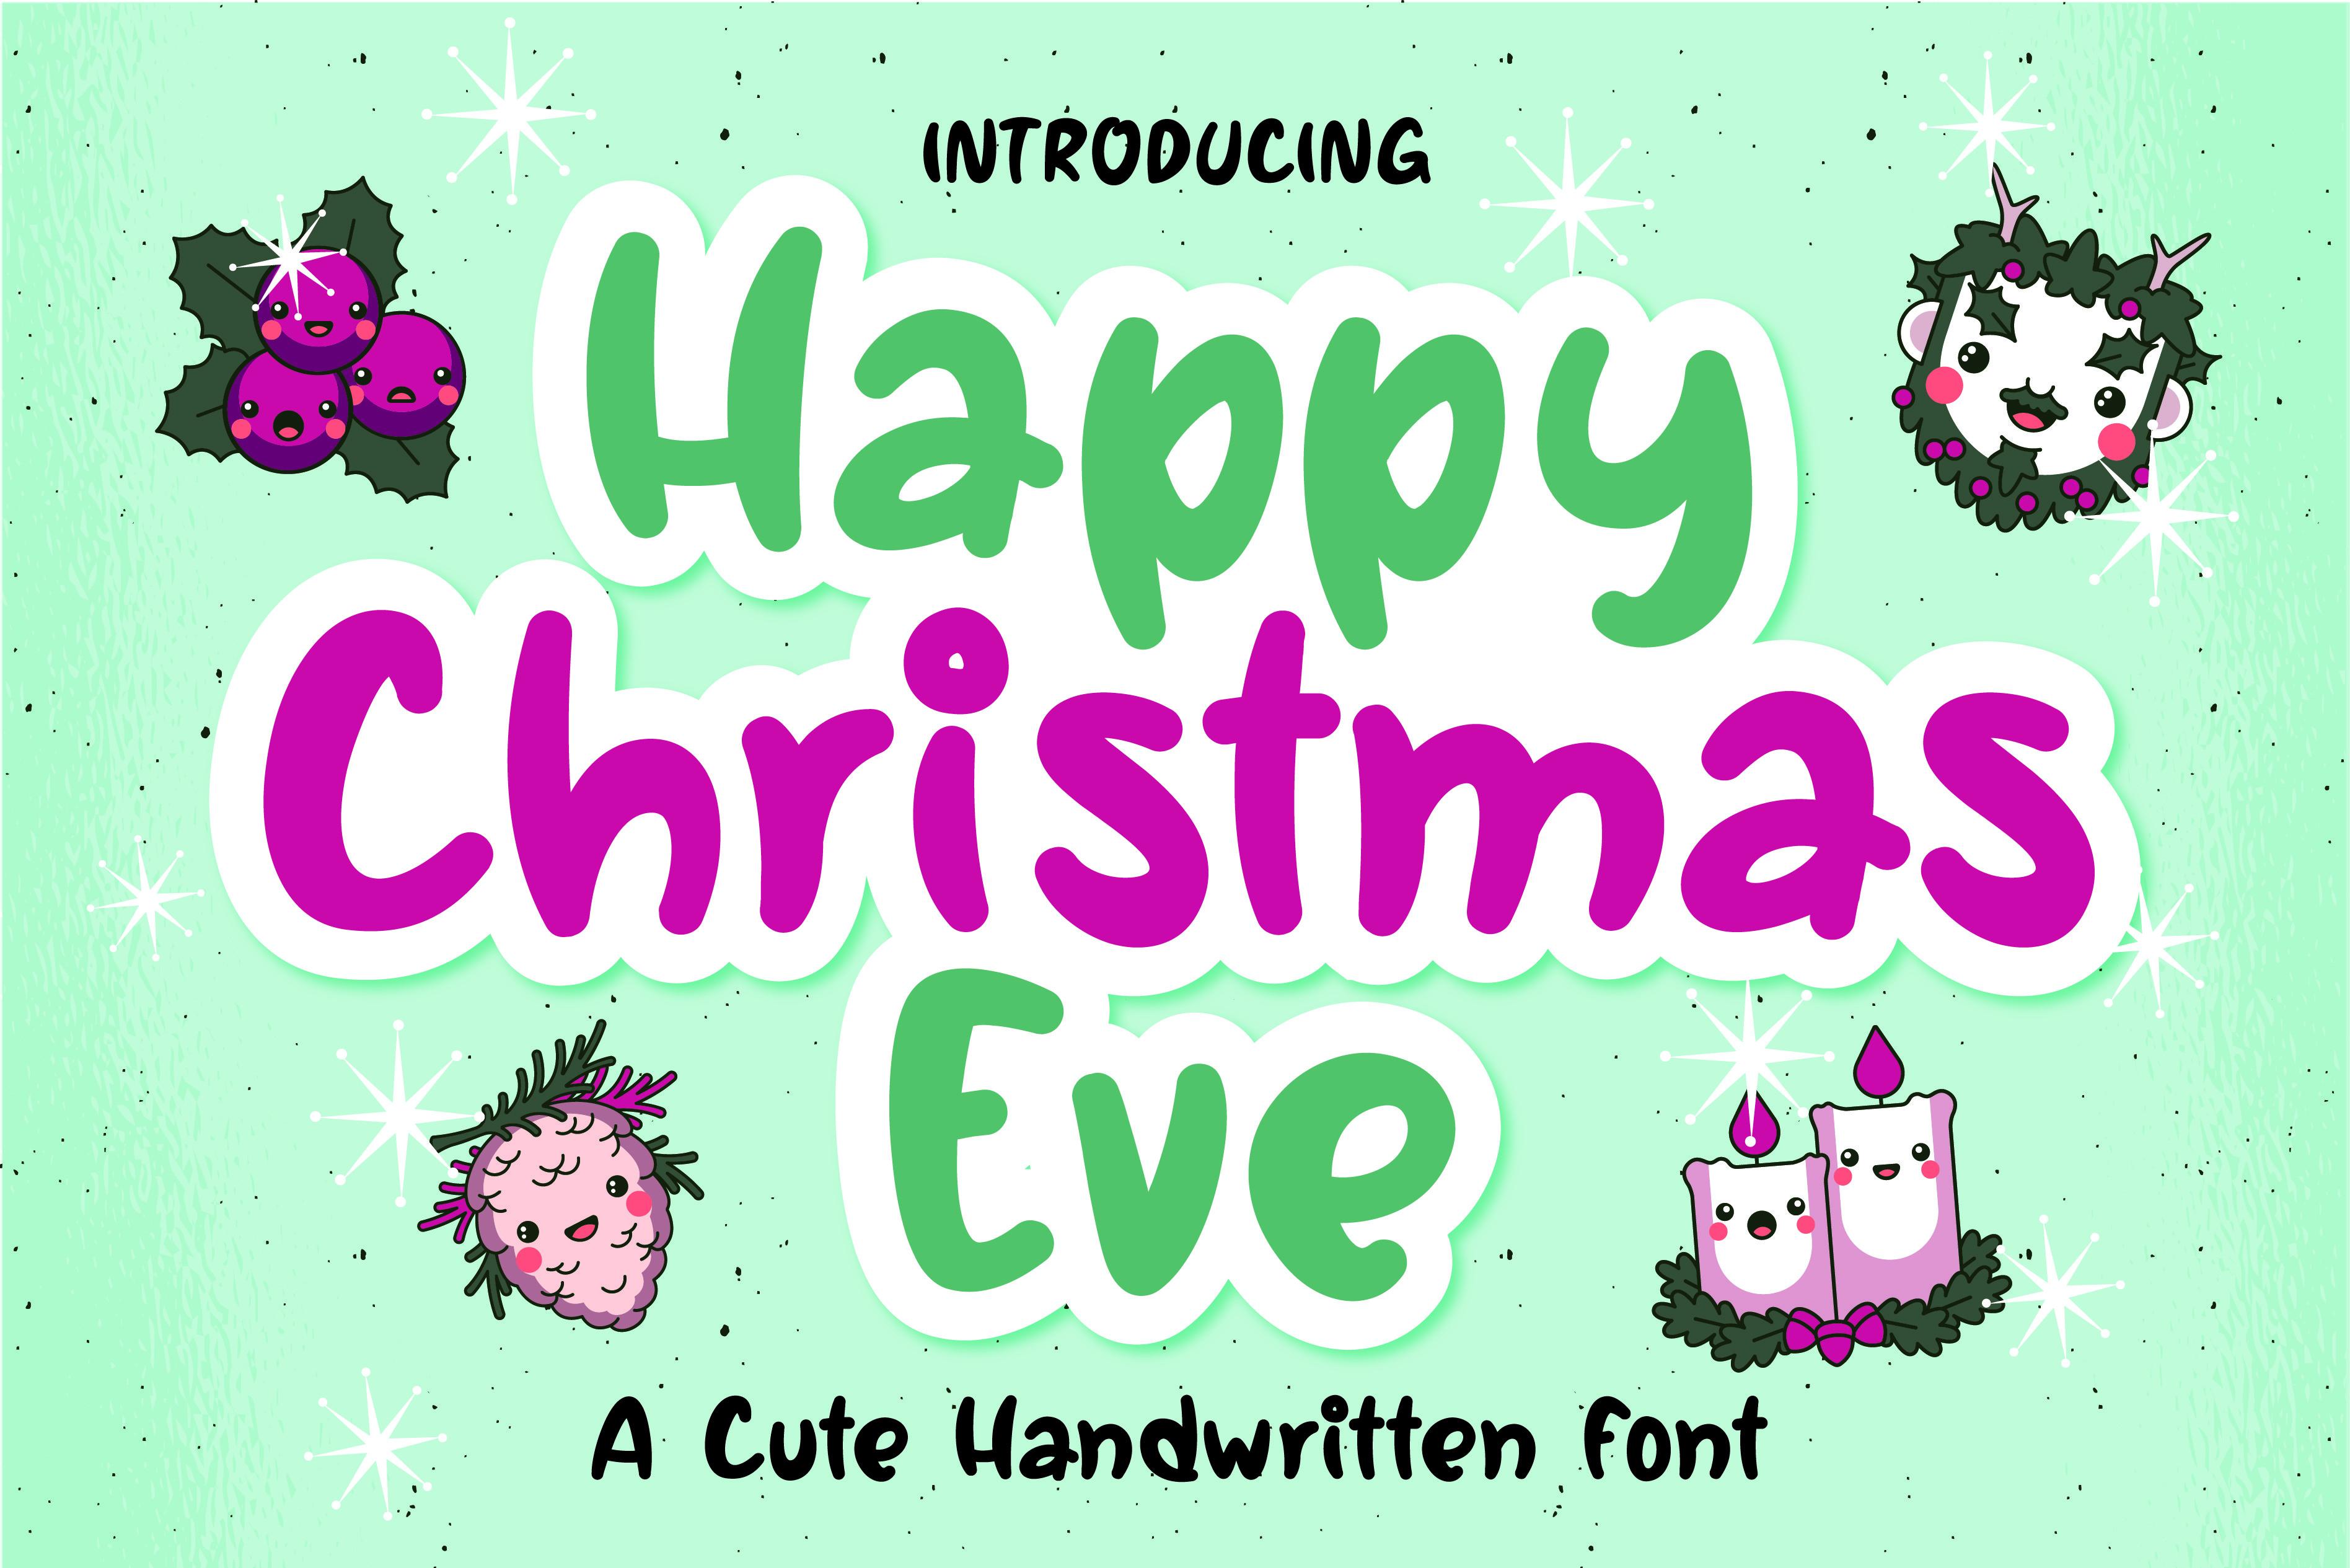 Happy Christmas Eve Font